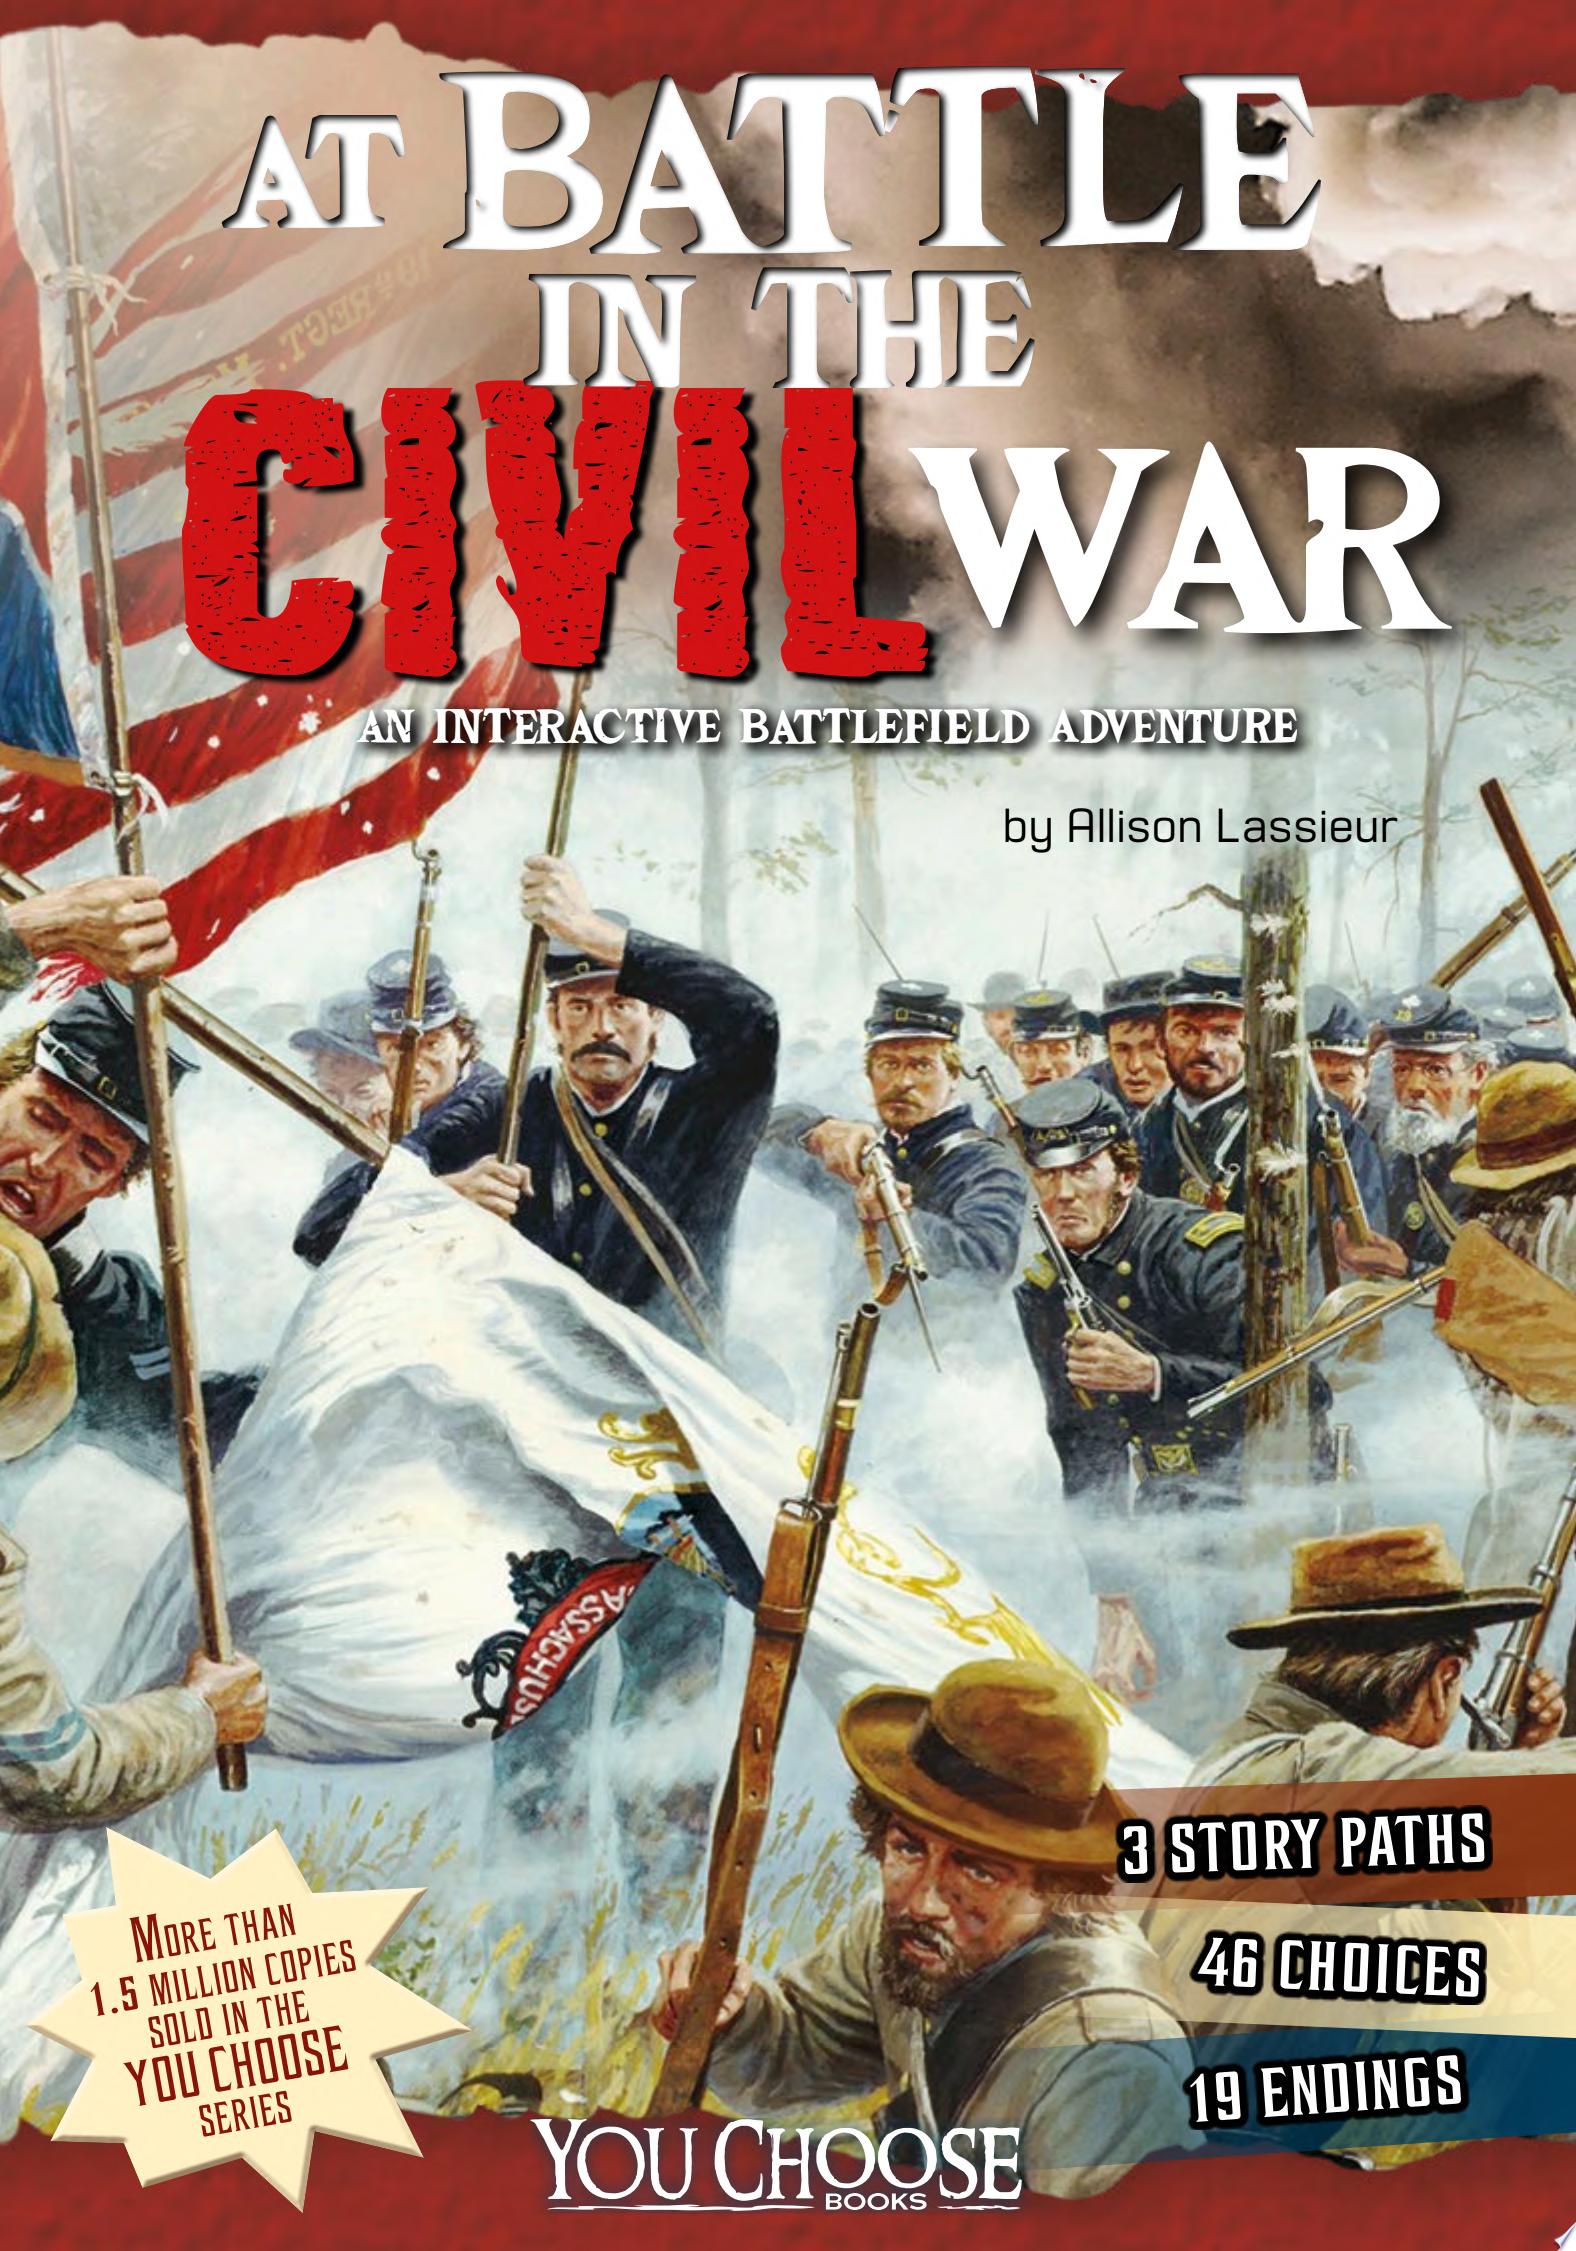 Image for "At Battle in the Civil War"